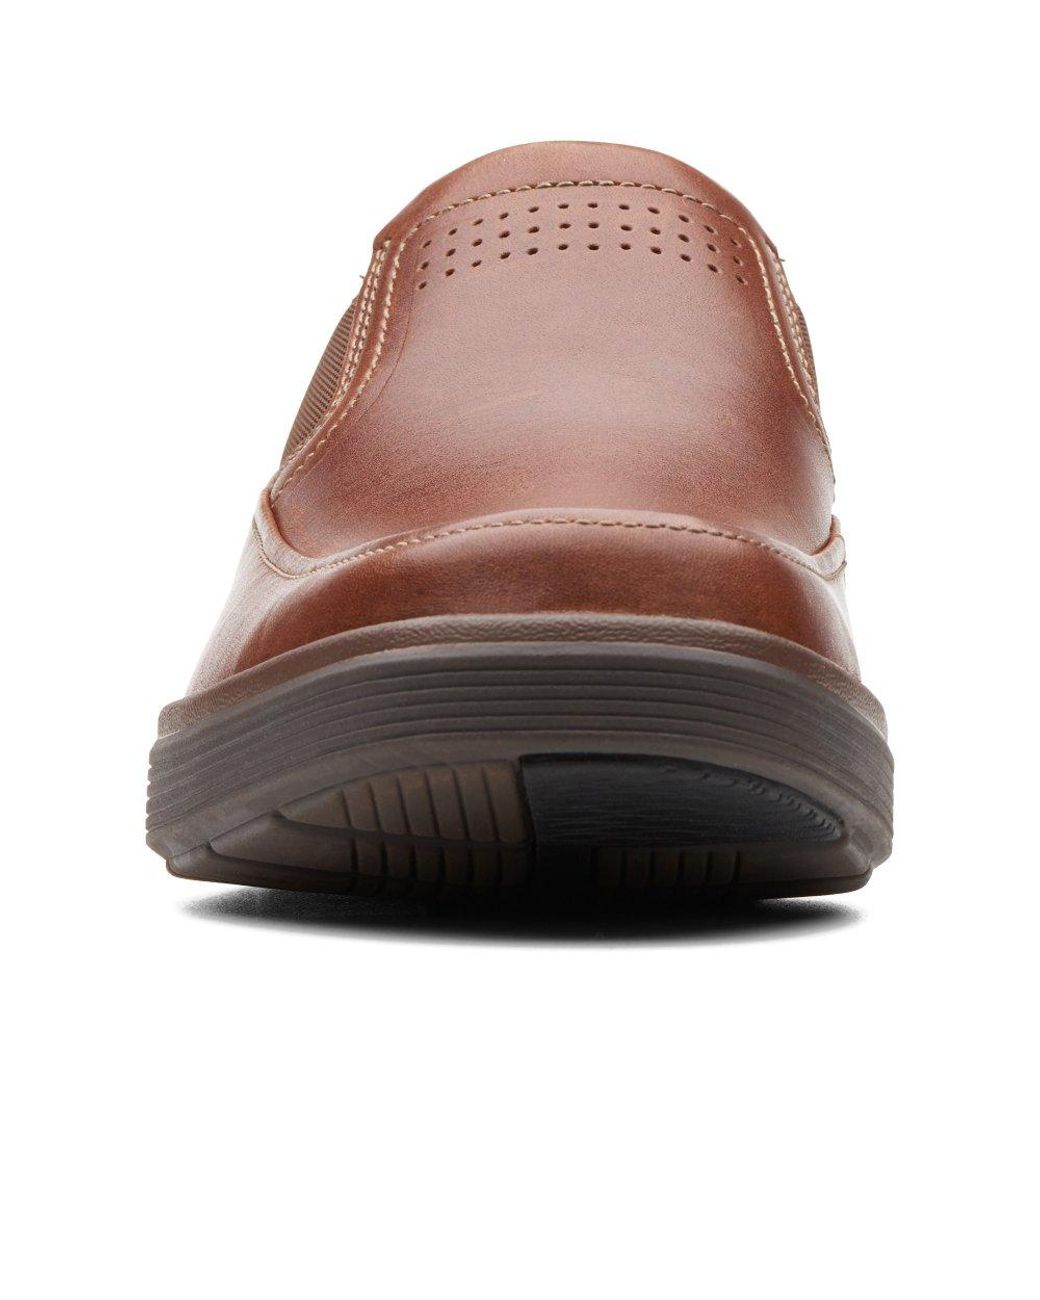 Clarks Un Abode Go Fit Casual Slip Shoes in for Men | Lyst UK